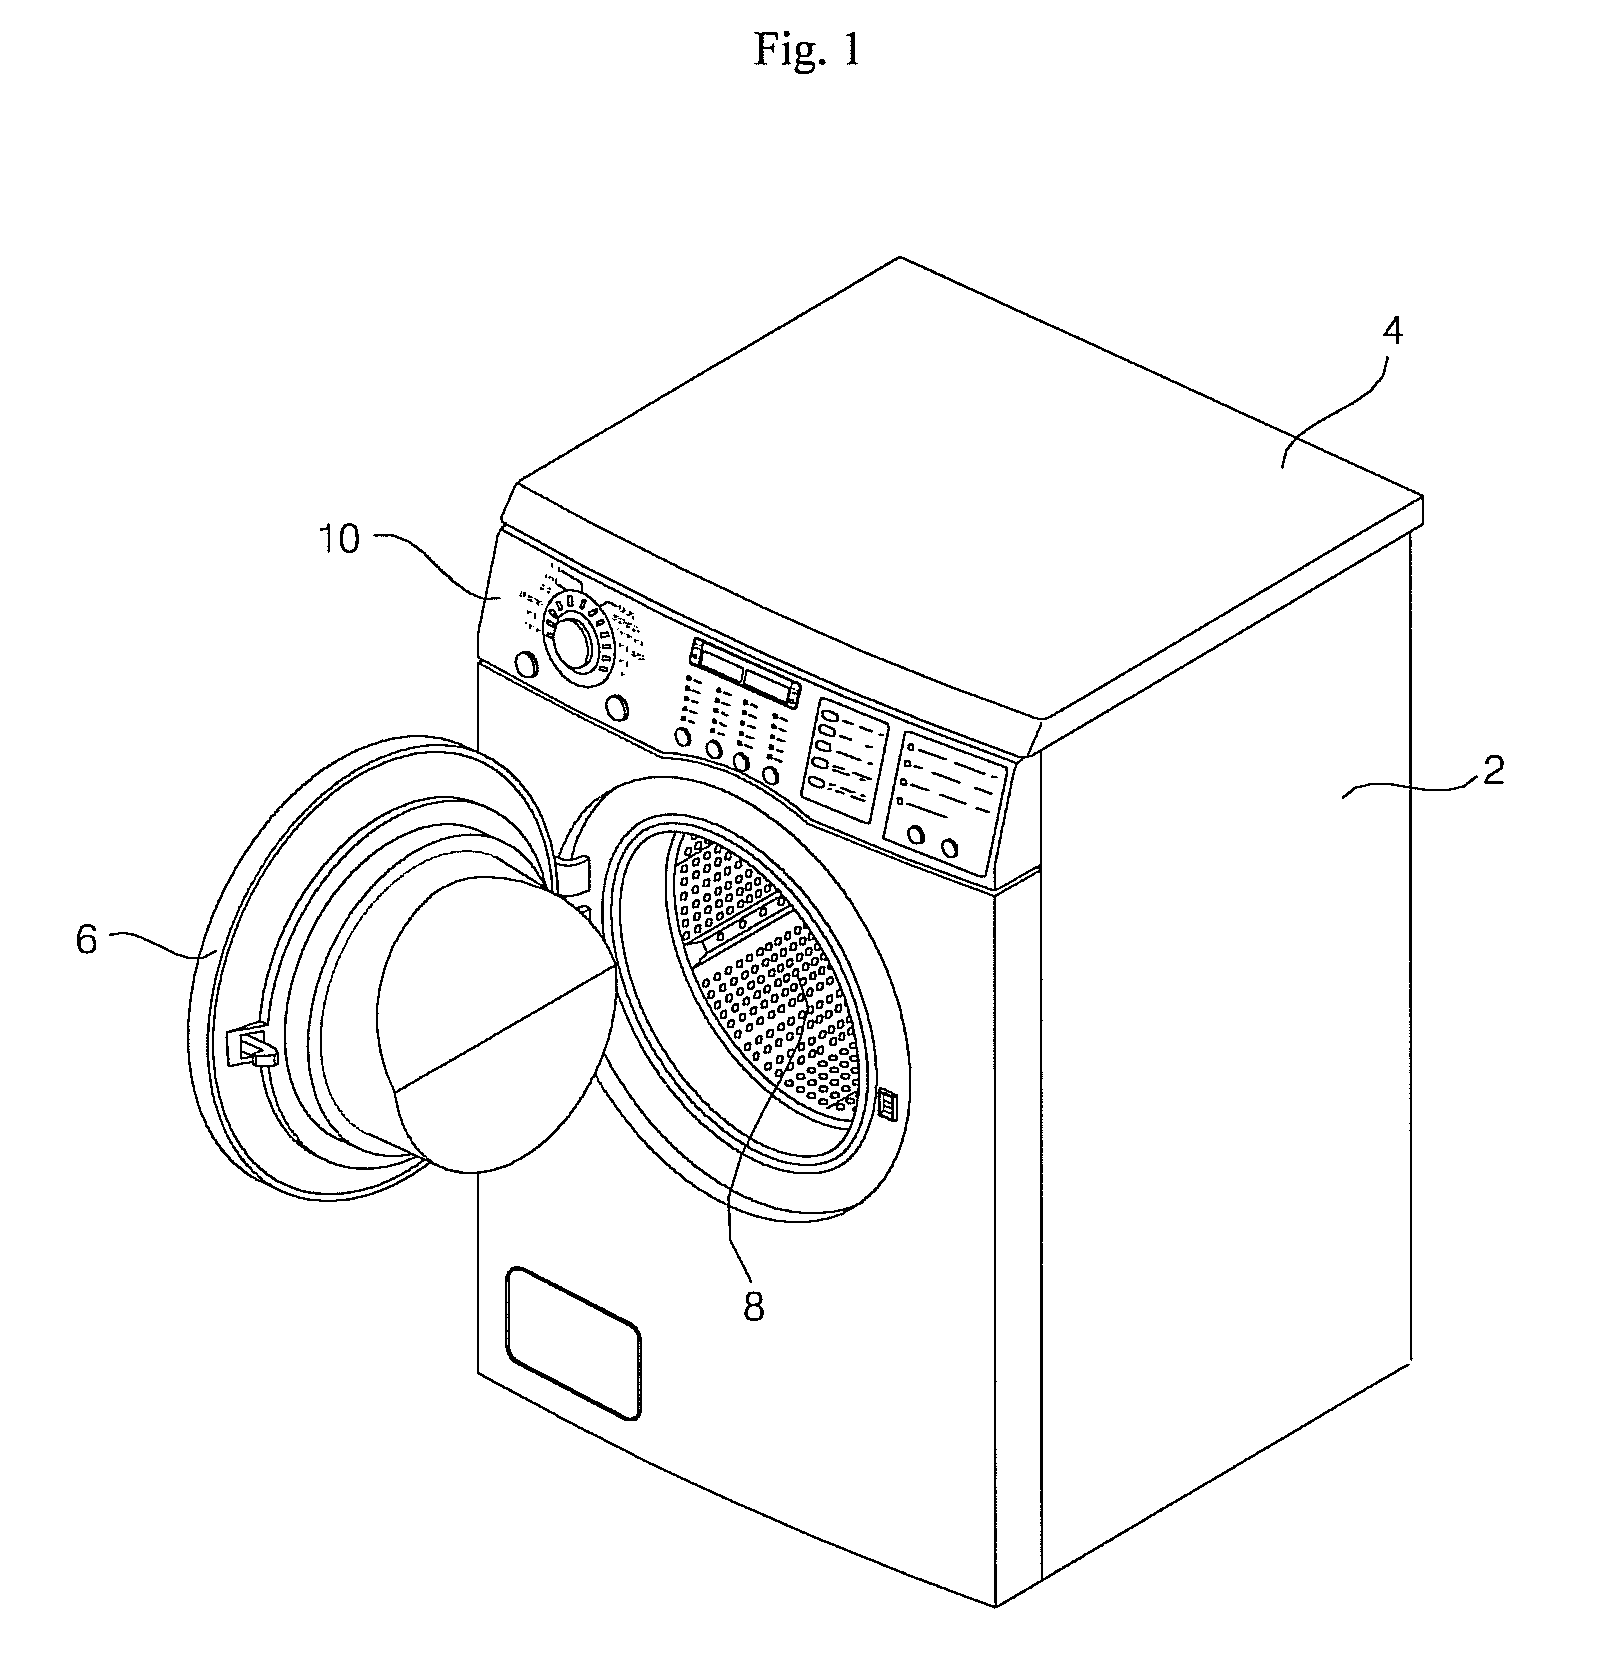 Fabric dryer and method of controlling the same